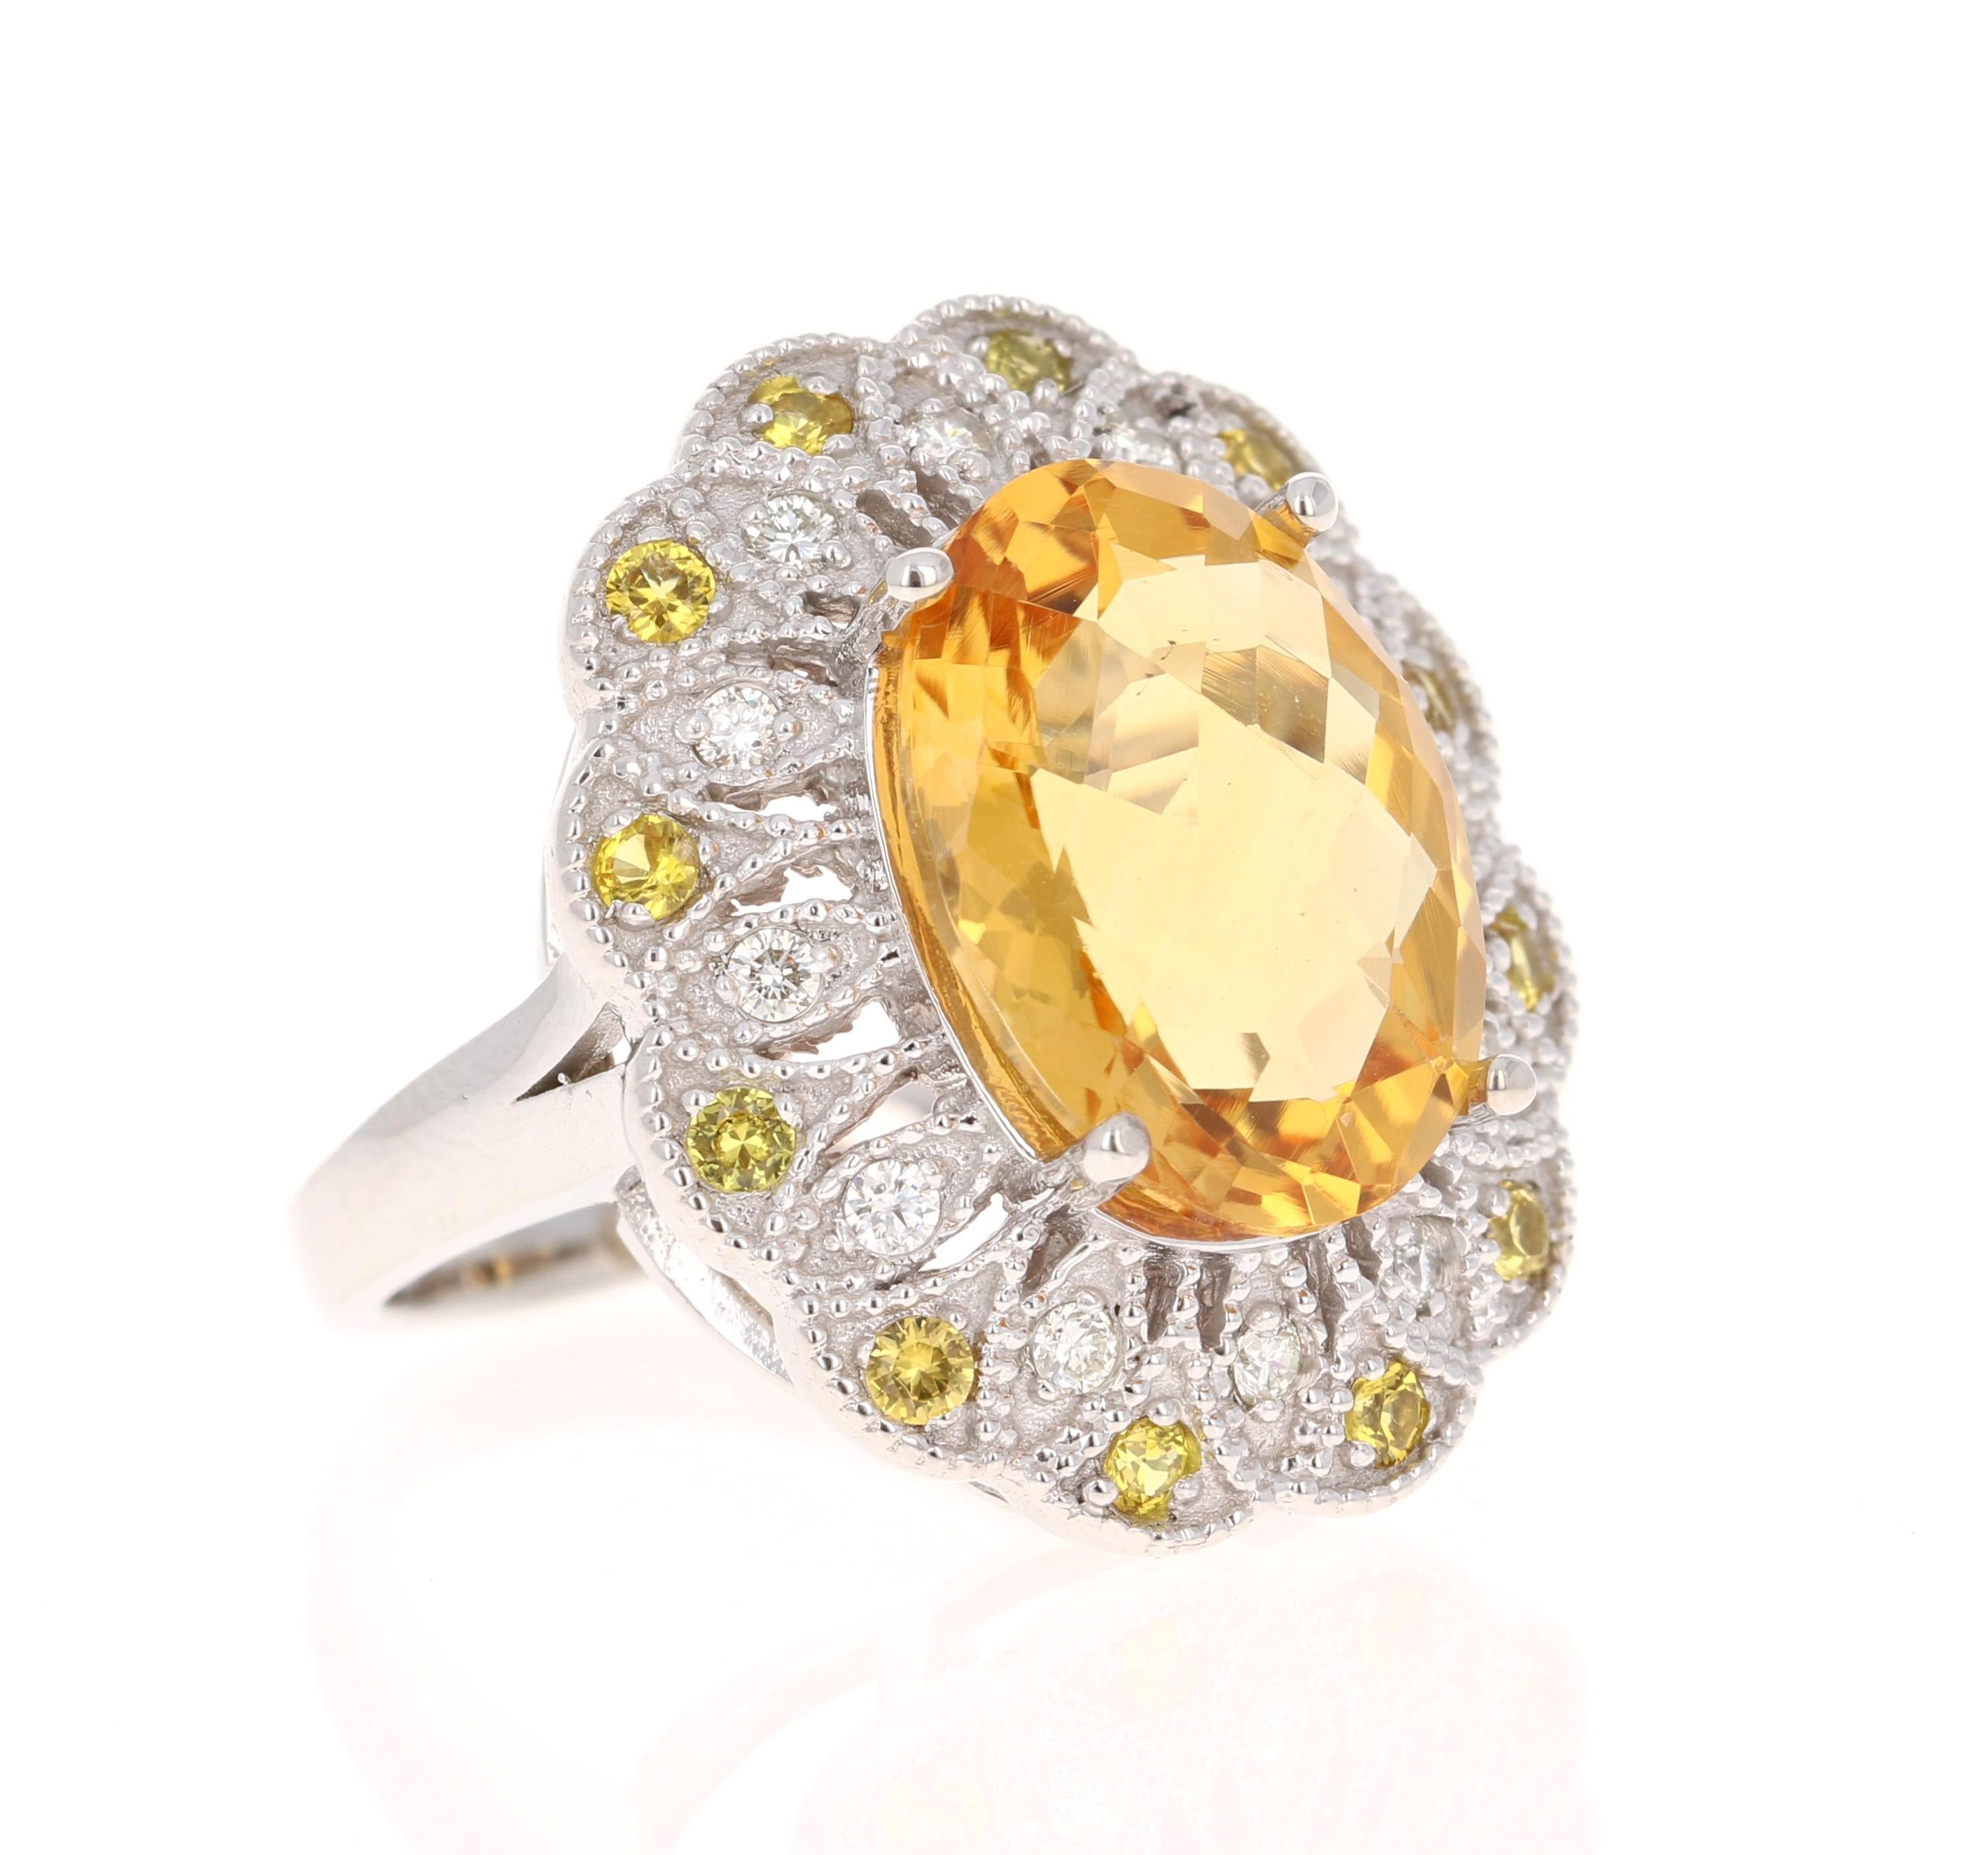 This beautiful ring has a Oval Cut Citrine that weighs 8.15 Carats. It is surrounded by 12 Yellow Sapphires that are round cut and weigh 0.53 carats (Clarity: VS, Color: H). There are also 12 Round Cut Diamonds that weigh 0.30 carats. The total